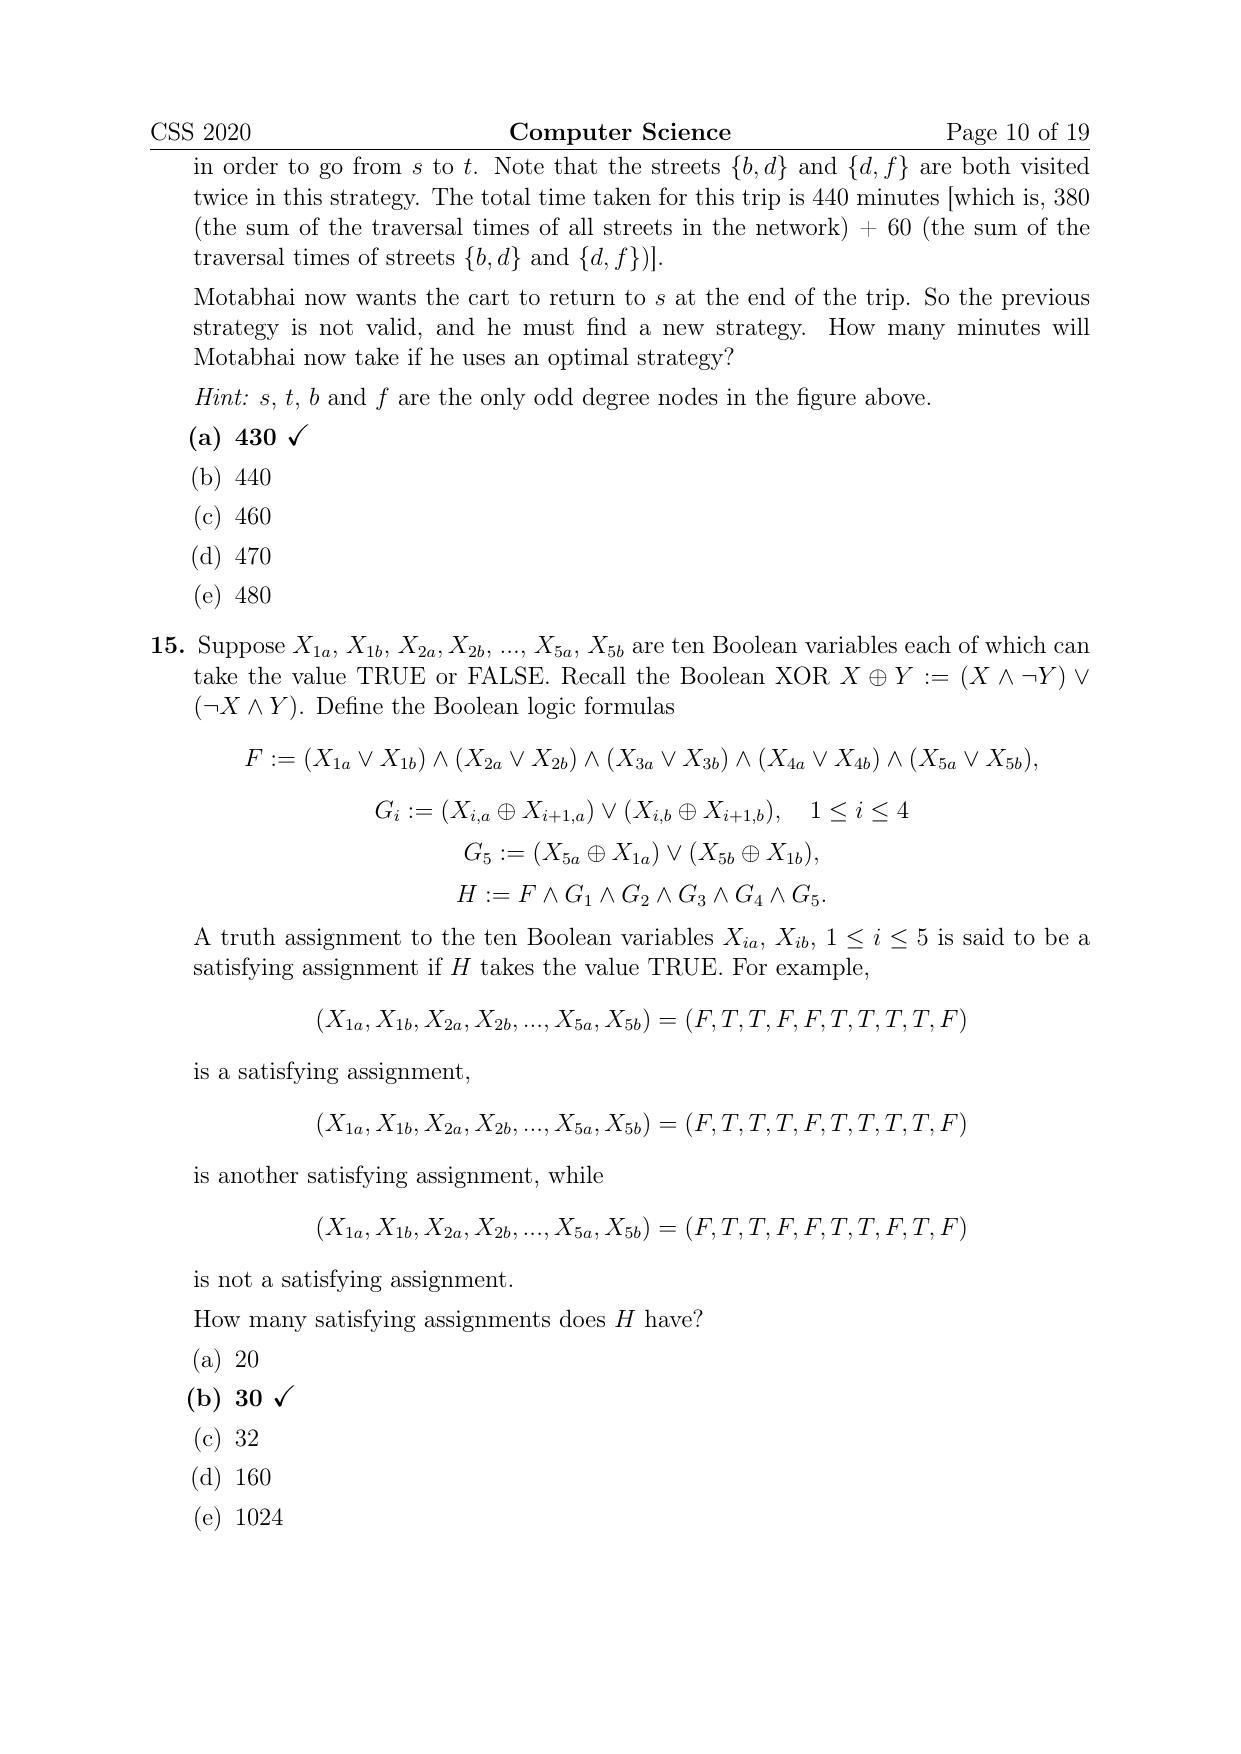 TIFR GS 2020 Computer & Systems Sciences Question Paper - Page 10